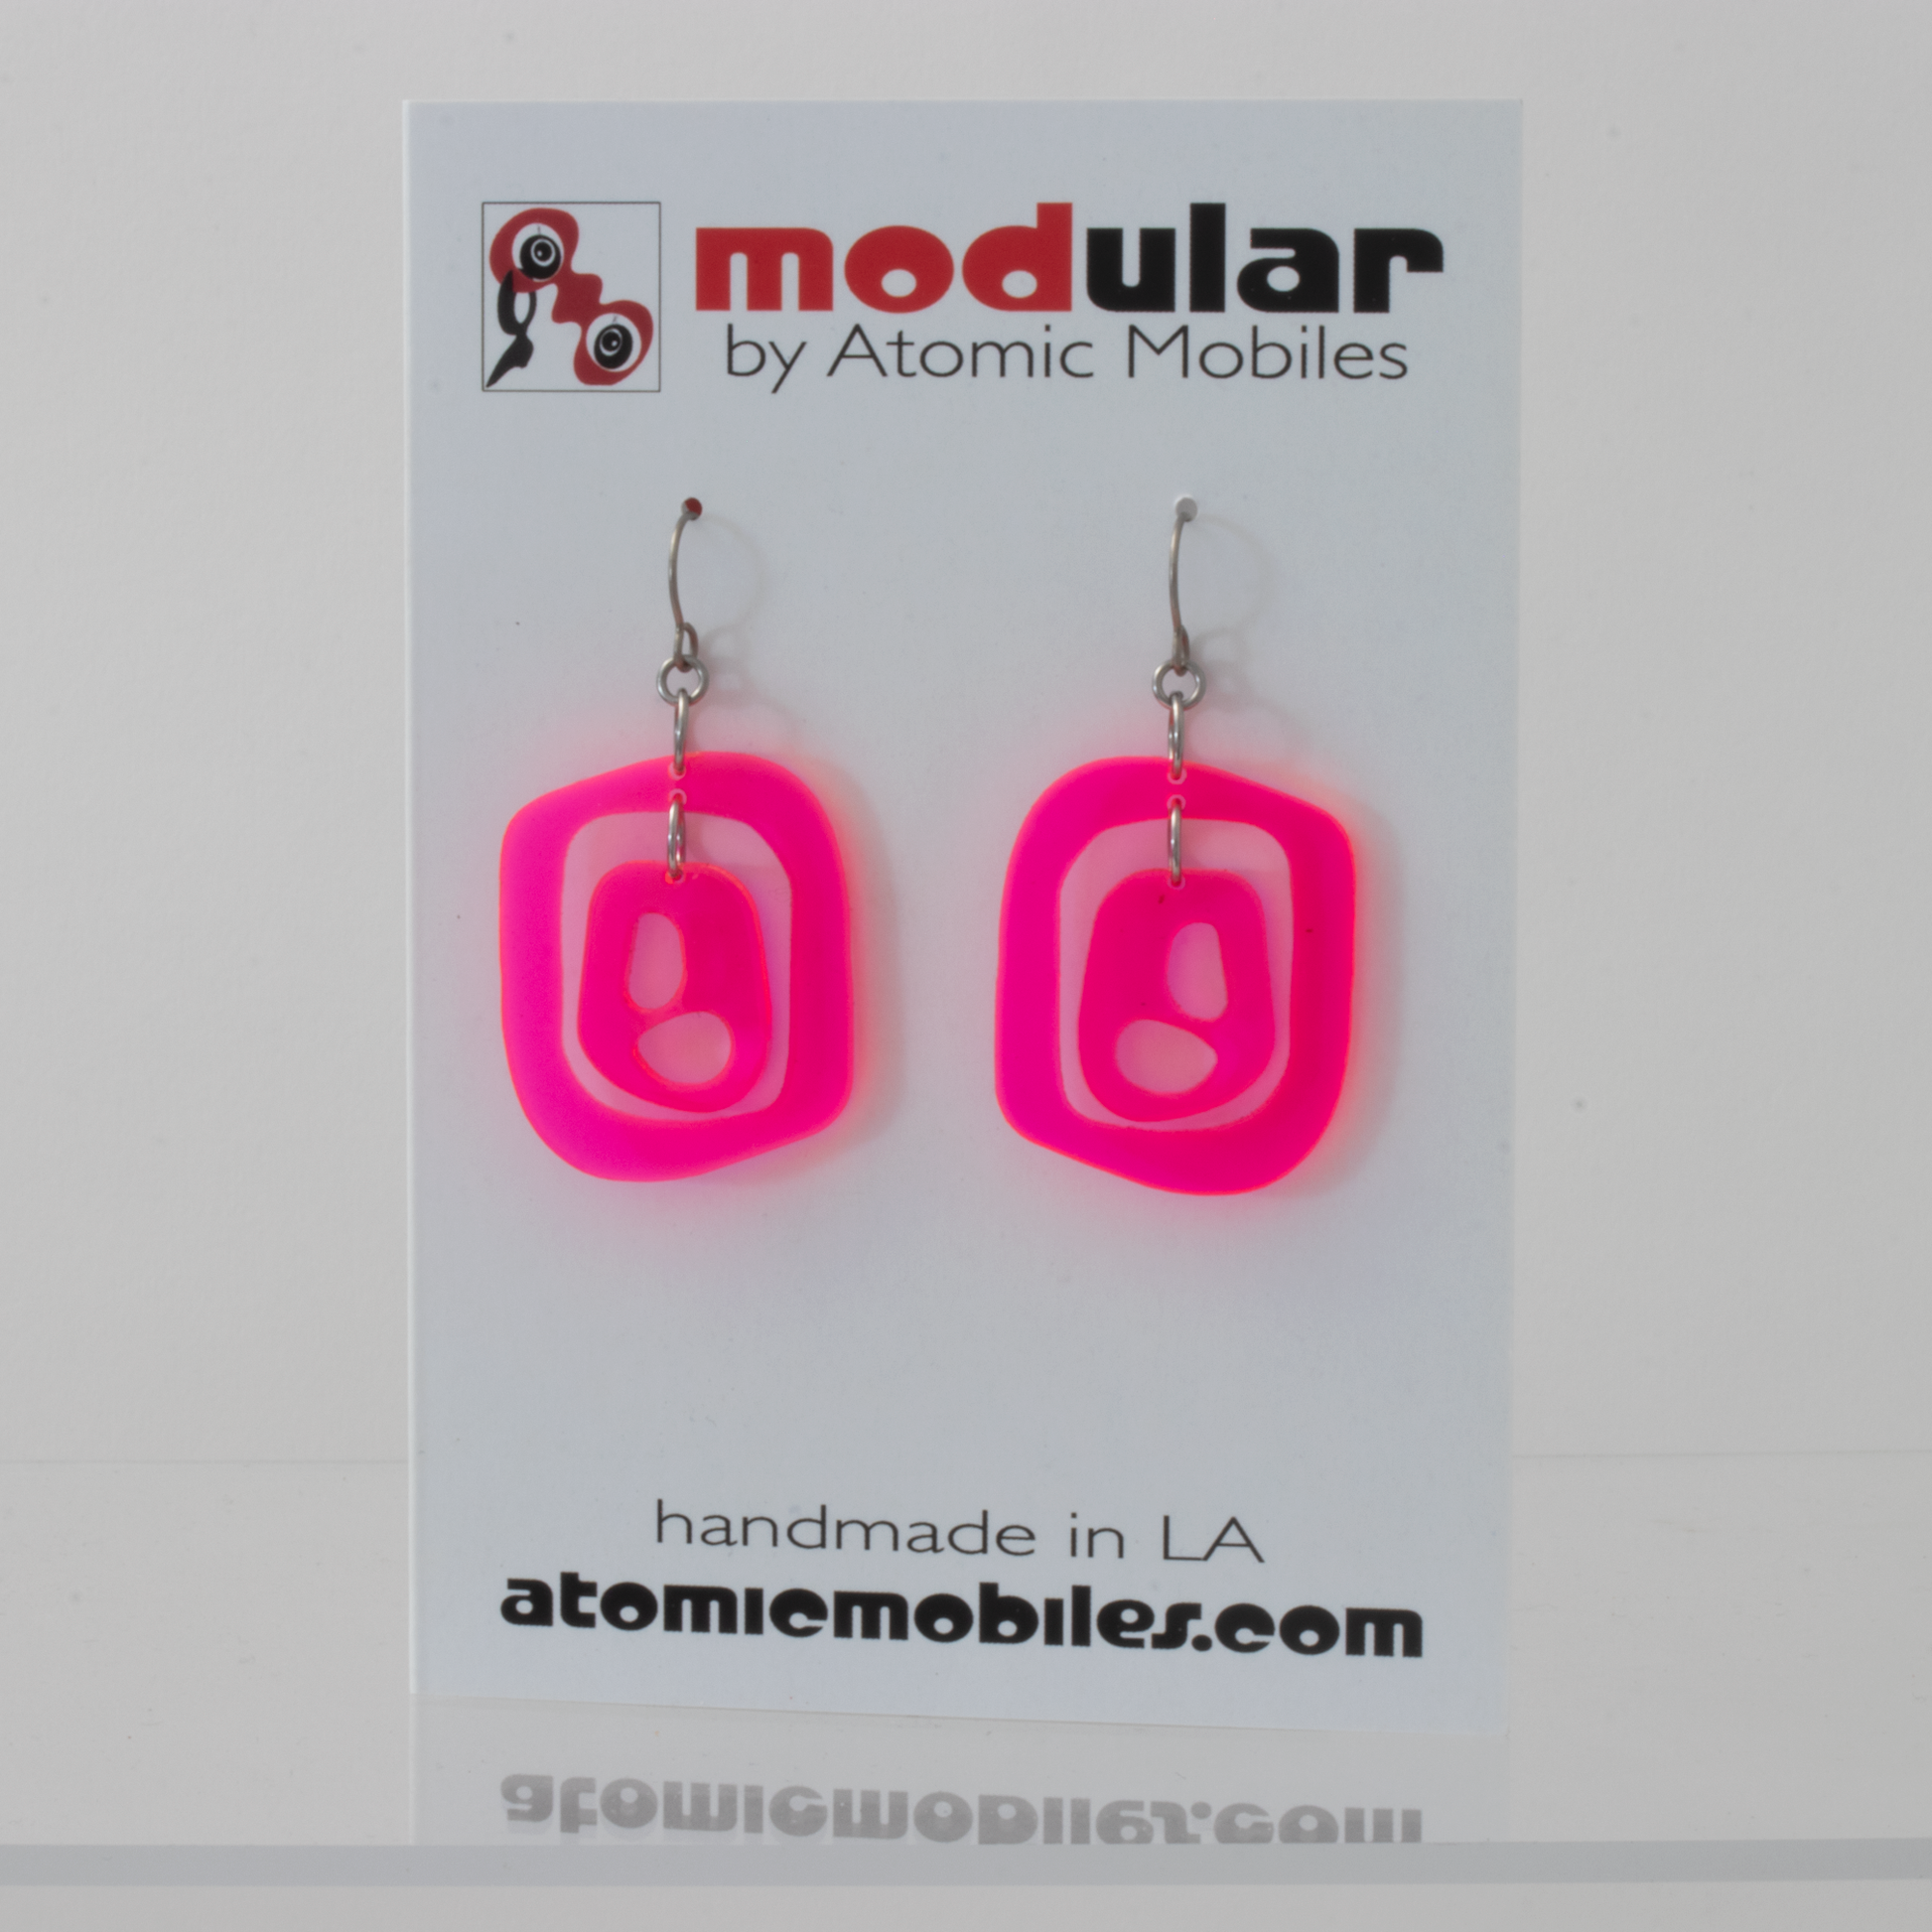 Mid 20th 1960s Mid Century Modern Style Earrings in Neon Fluorescent Hot Pink plexiglass acrylic by AtomicMobiles.com